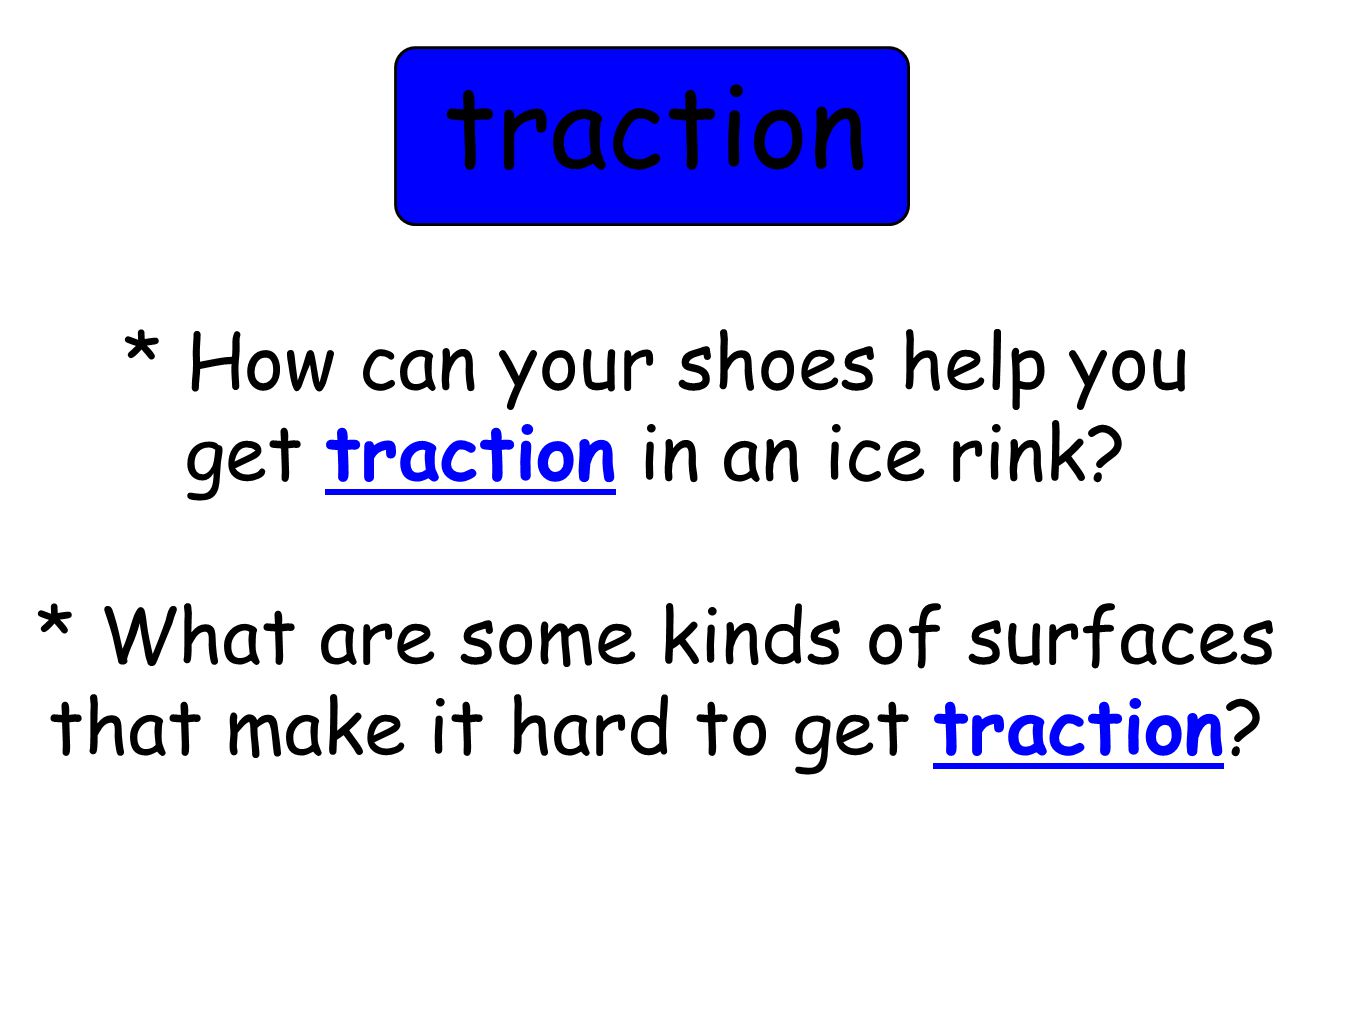 * How can your shoes help you get traction in an ice rink.